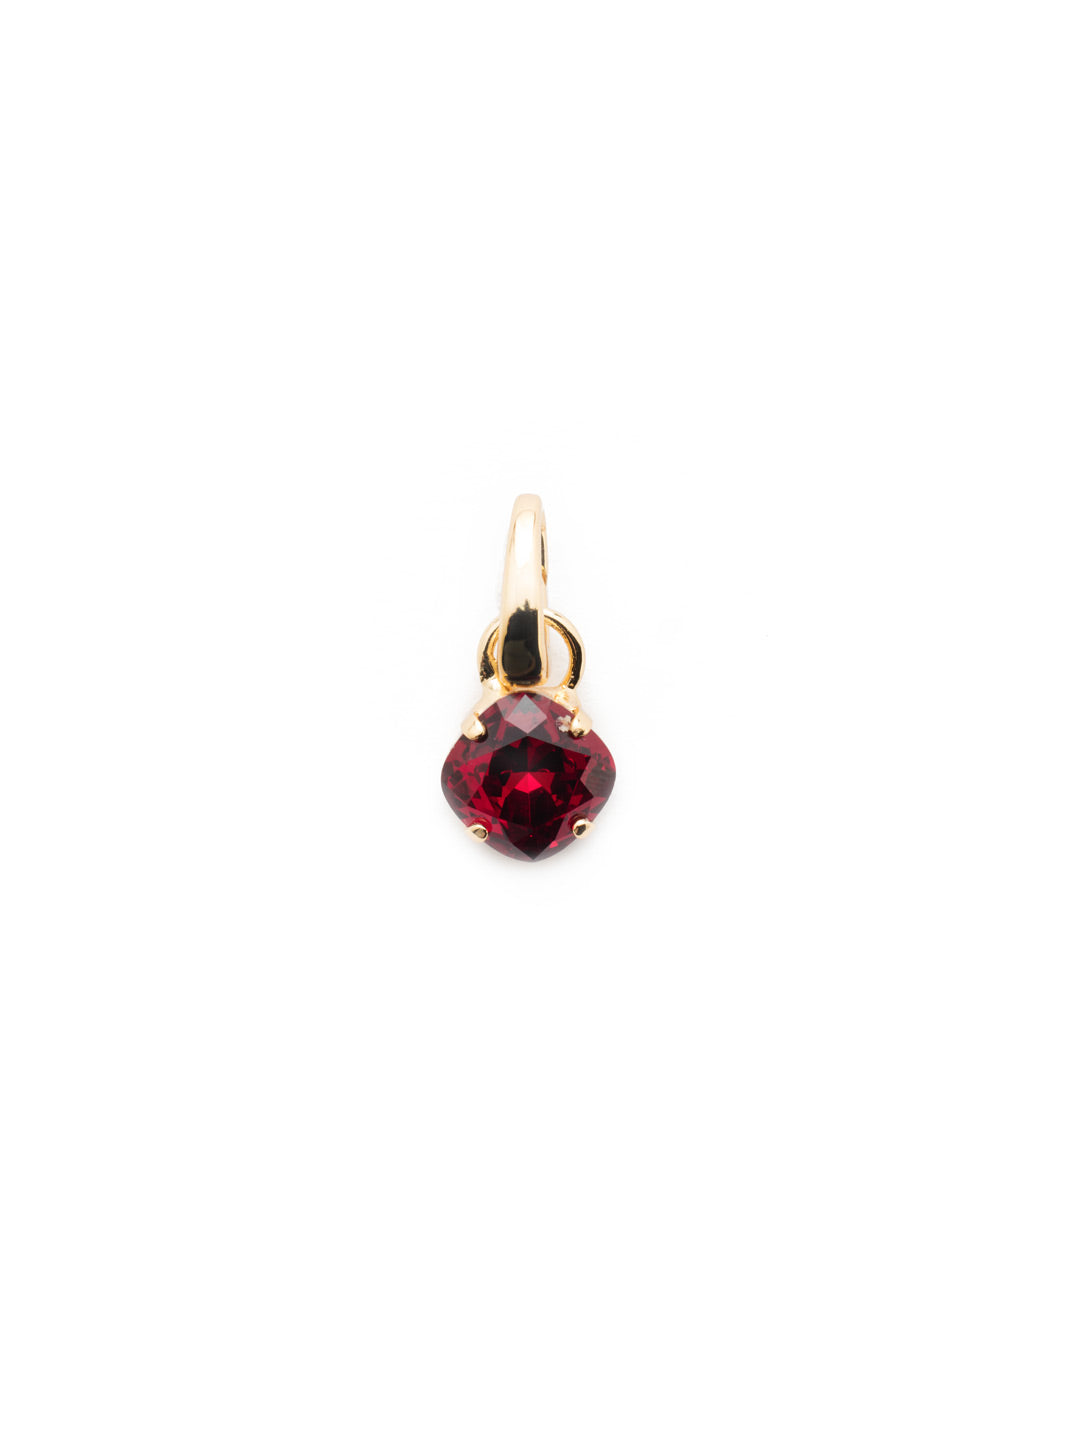 July Birthstone Siam Charm - CEU1BGSI - <p>A cushion-cut crystal designed in your beautiful birthstone. Simply attach it to our favorite chain for an everyday look. From Sorrelli's Siam collection in our Bright Gold-tone finish.</p>